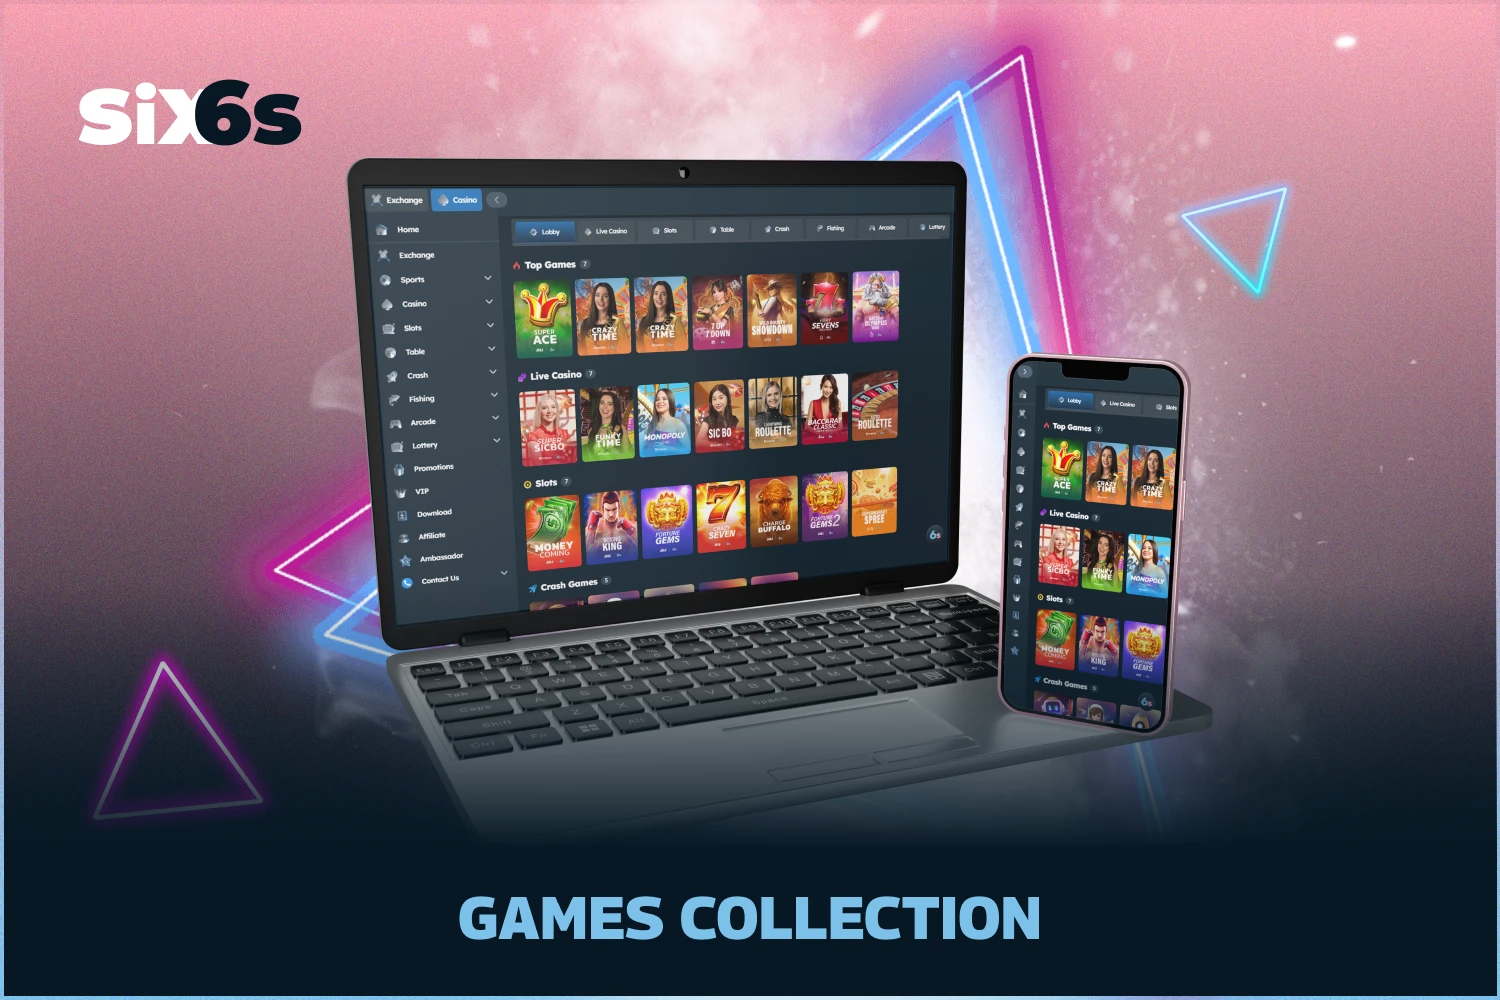 Six6s is considered as the best online casino in Bangladesh due to its wide selection of games for every taste from licensed and reputed providers